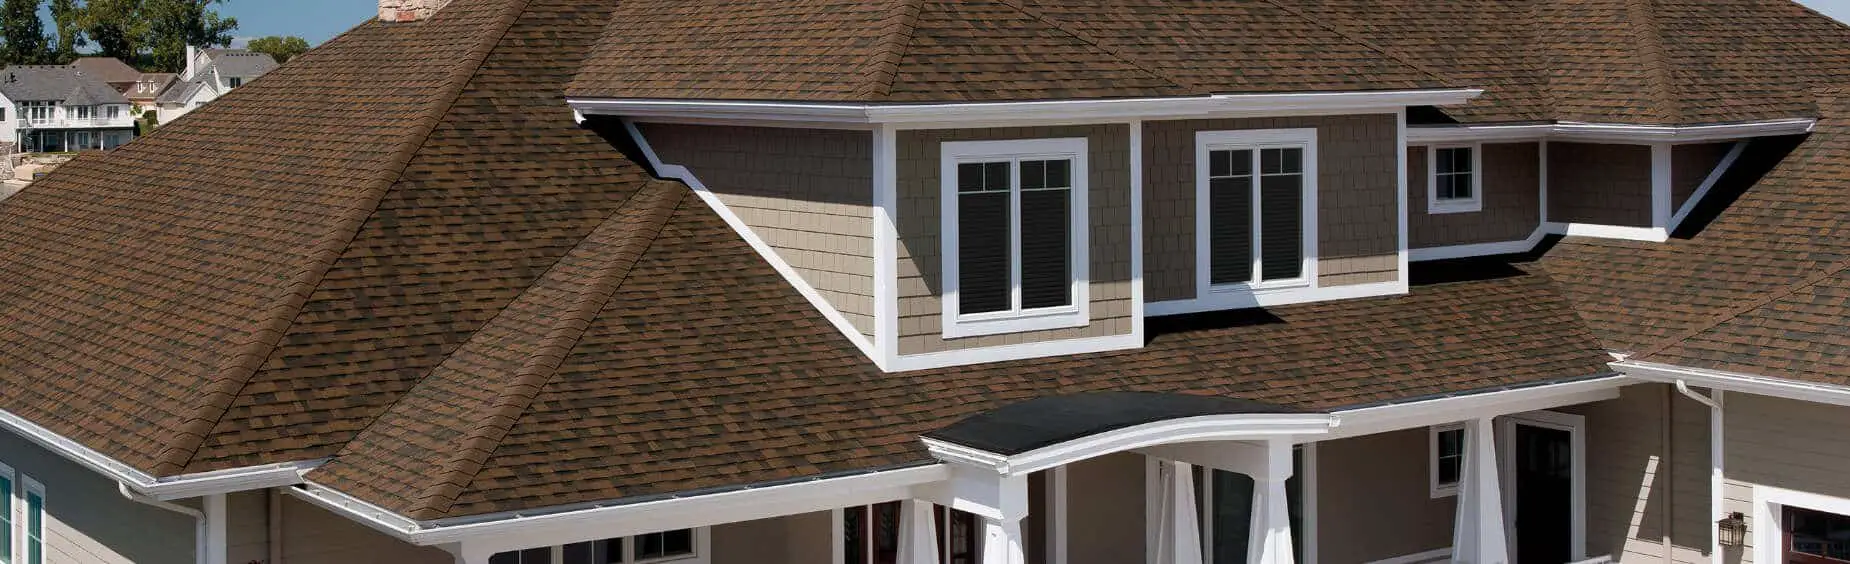 FAQ About Roofing Services